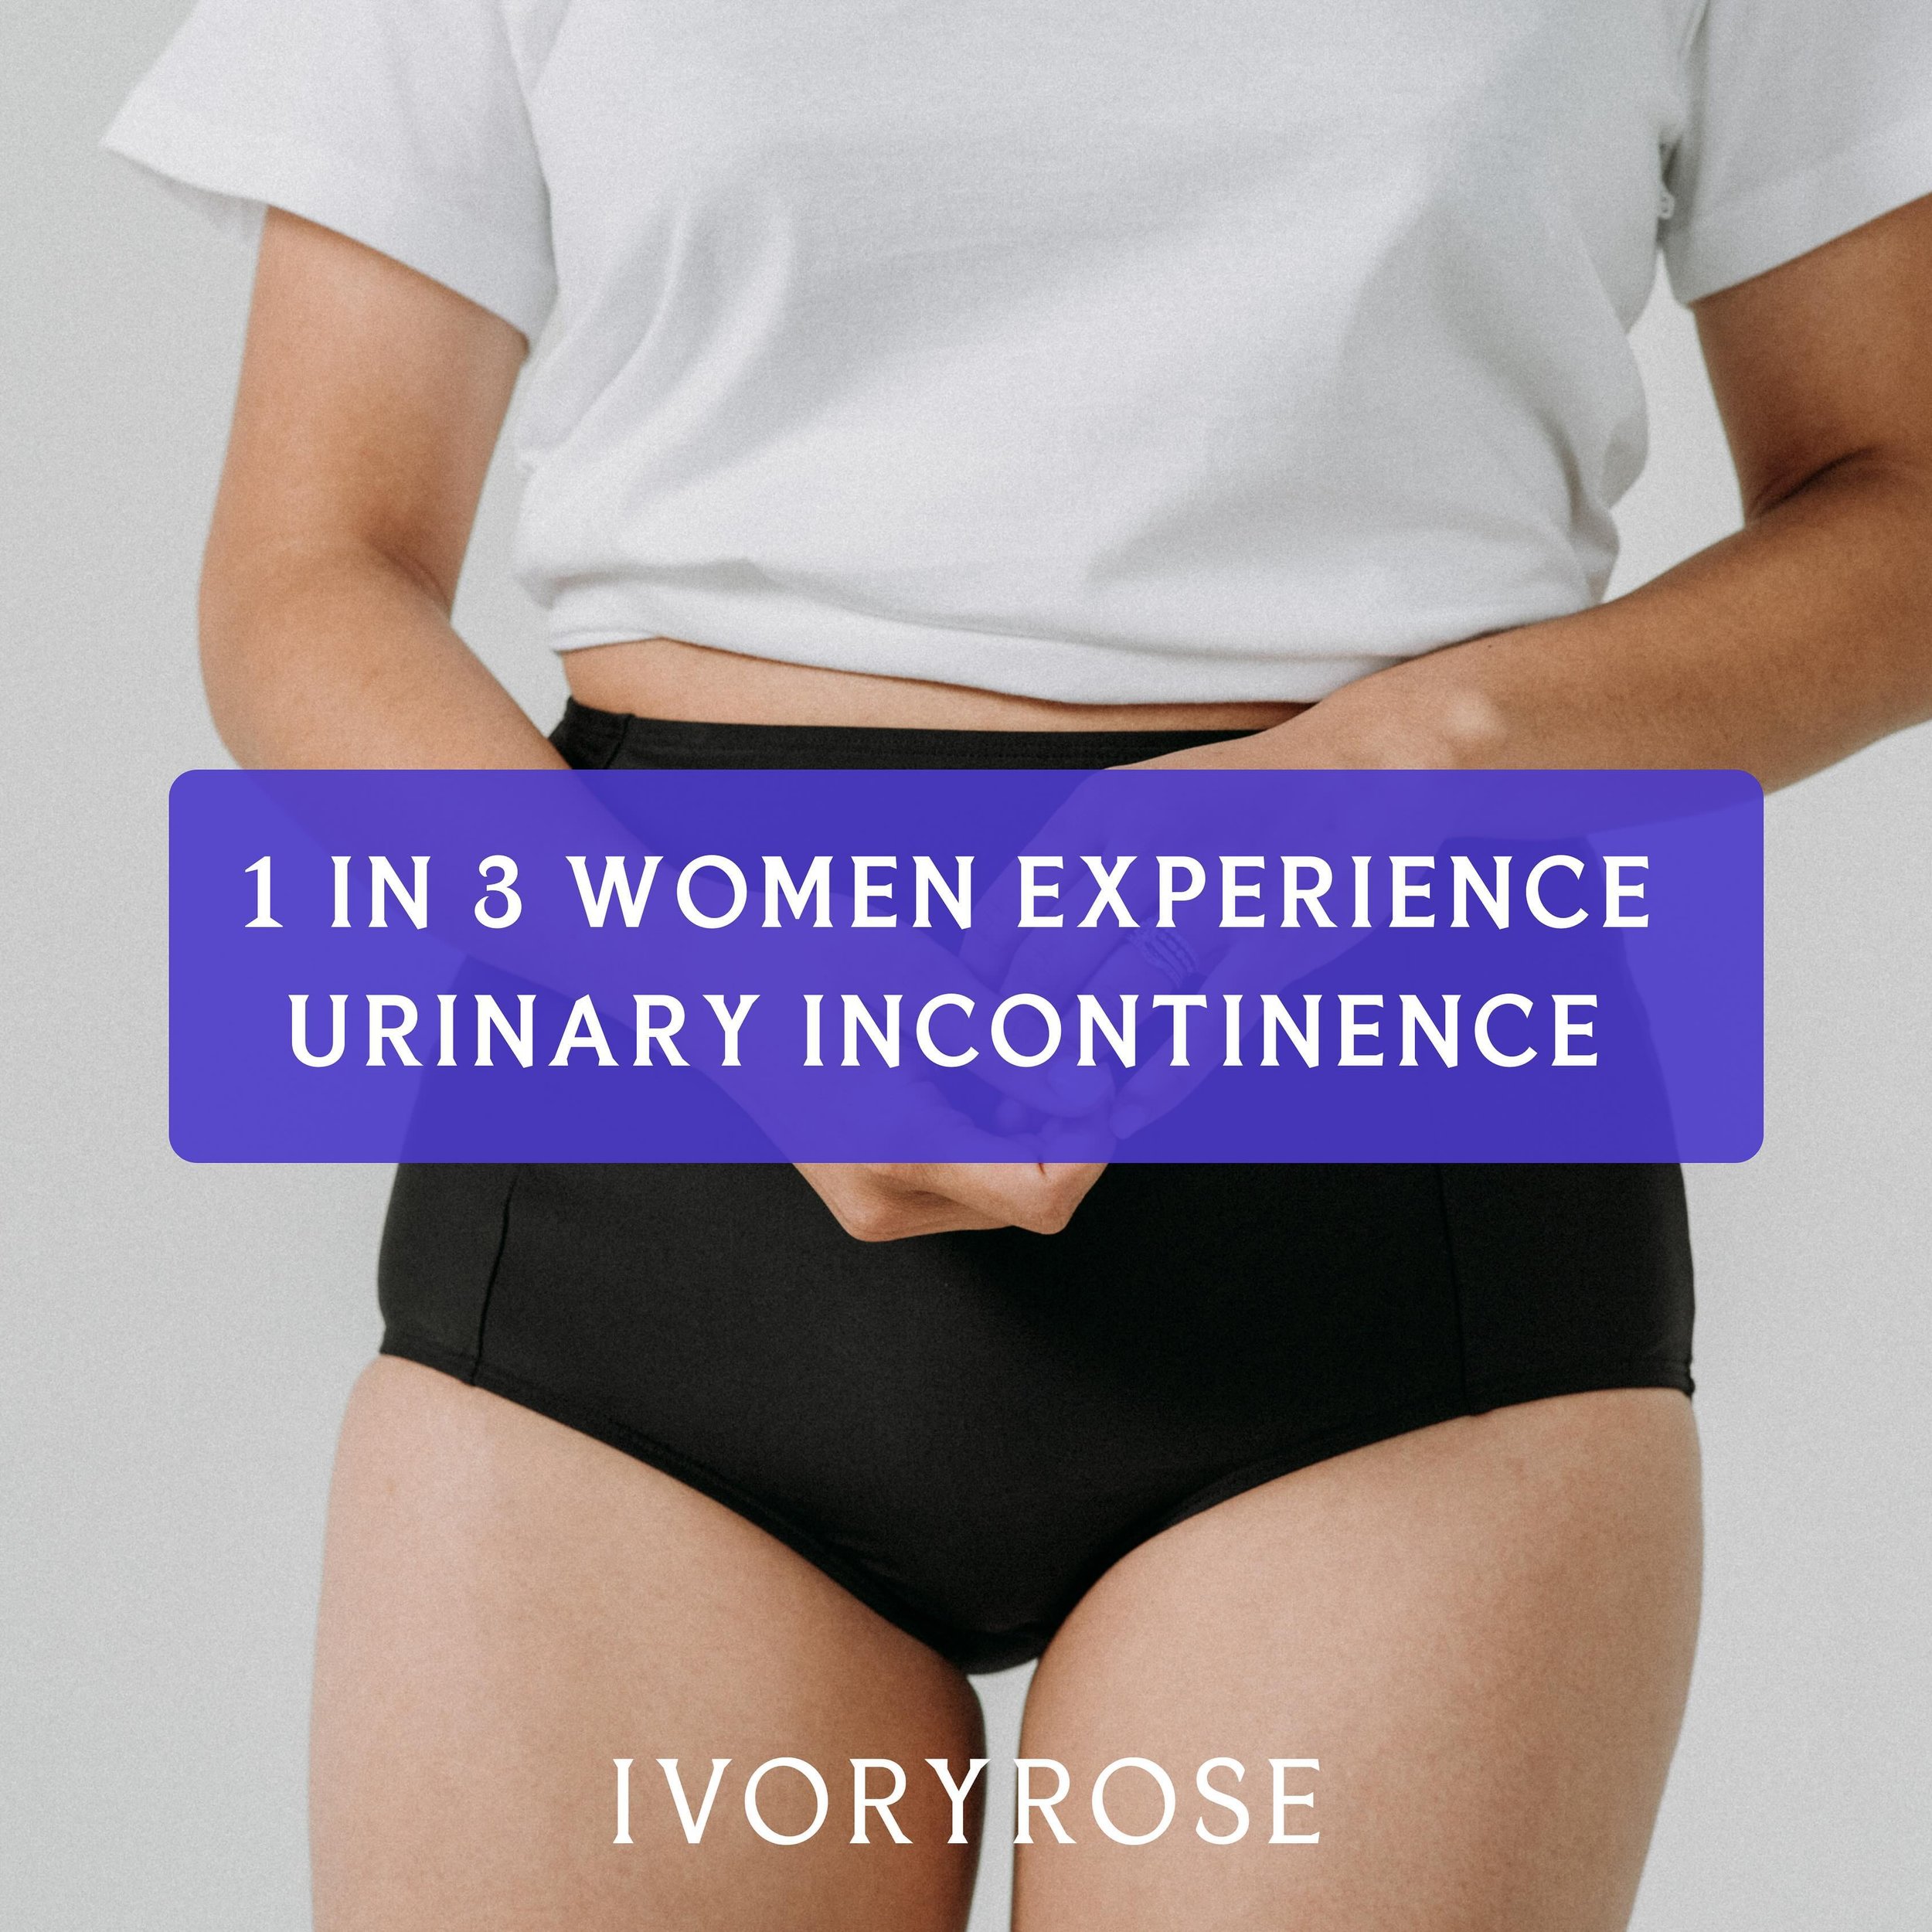 Of all the women experiencing urinary incontinence, 62% don&rsquo;t seek help - but we are here to change that. 
​​​​
​​​​​​​​We understand the first step can feel scary and we want you to know we are here to listen and offer individualised support. 